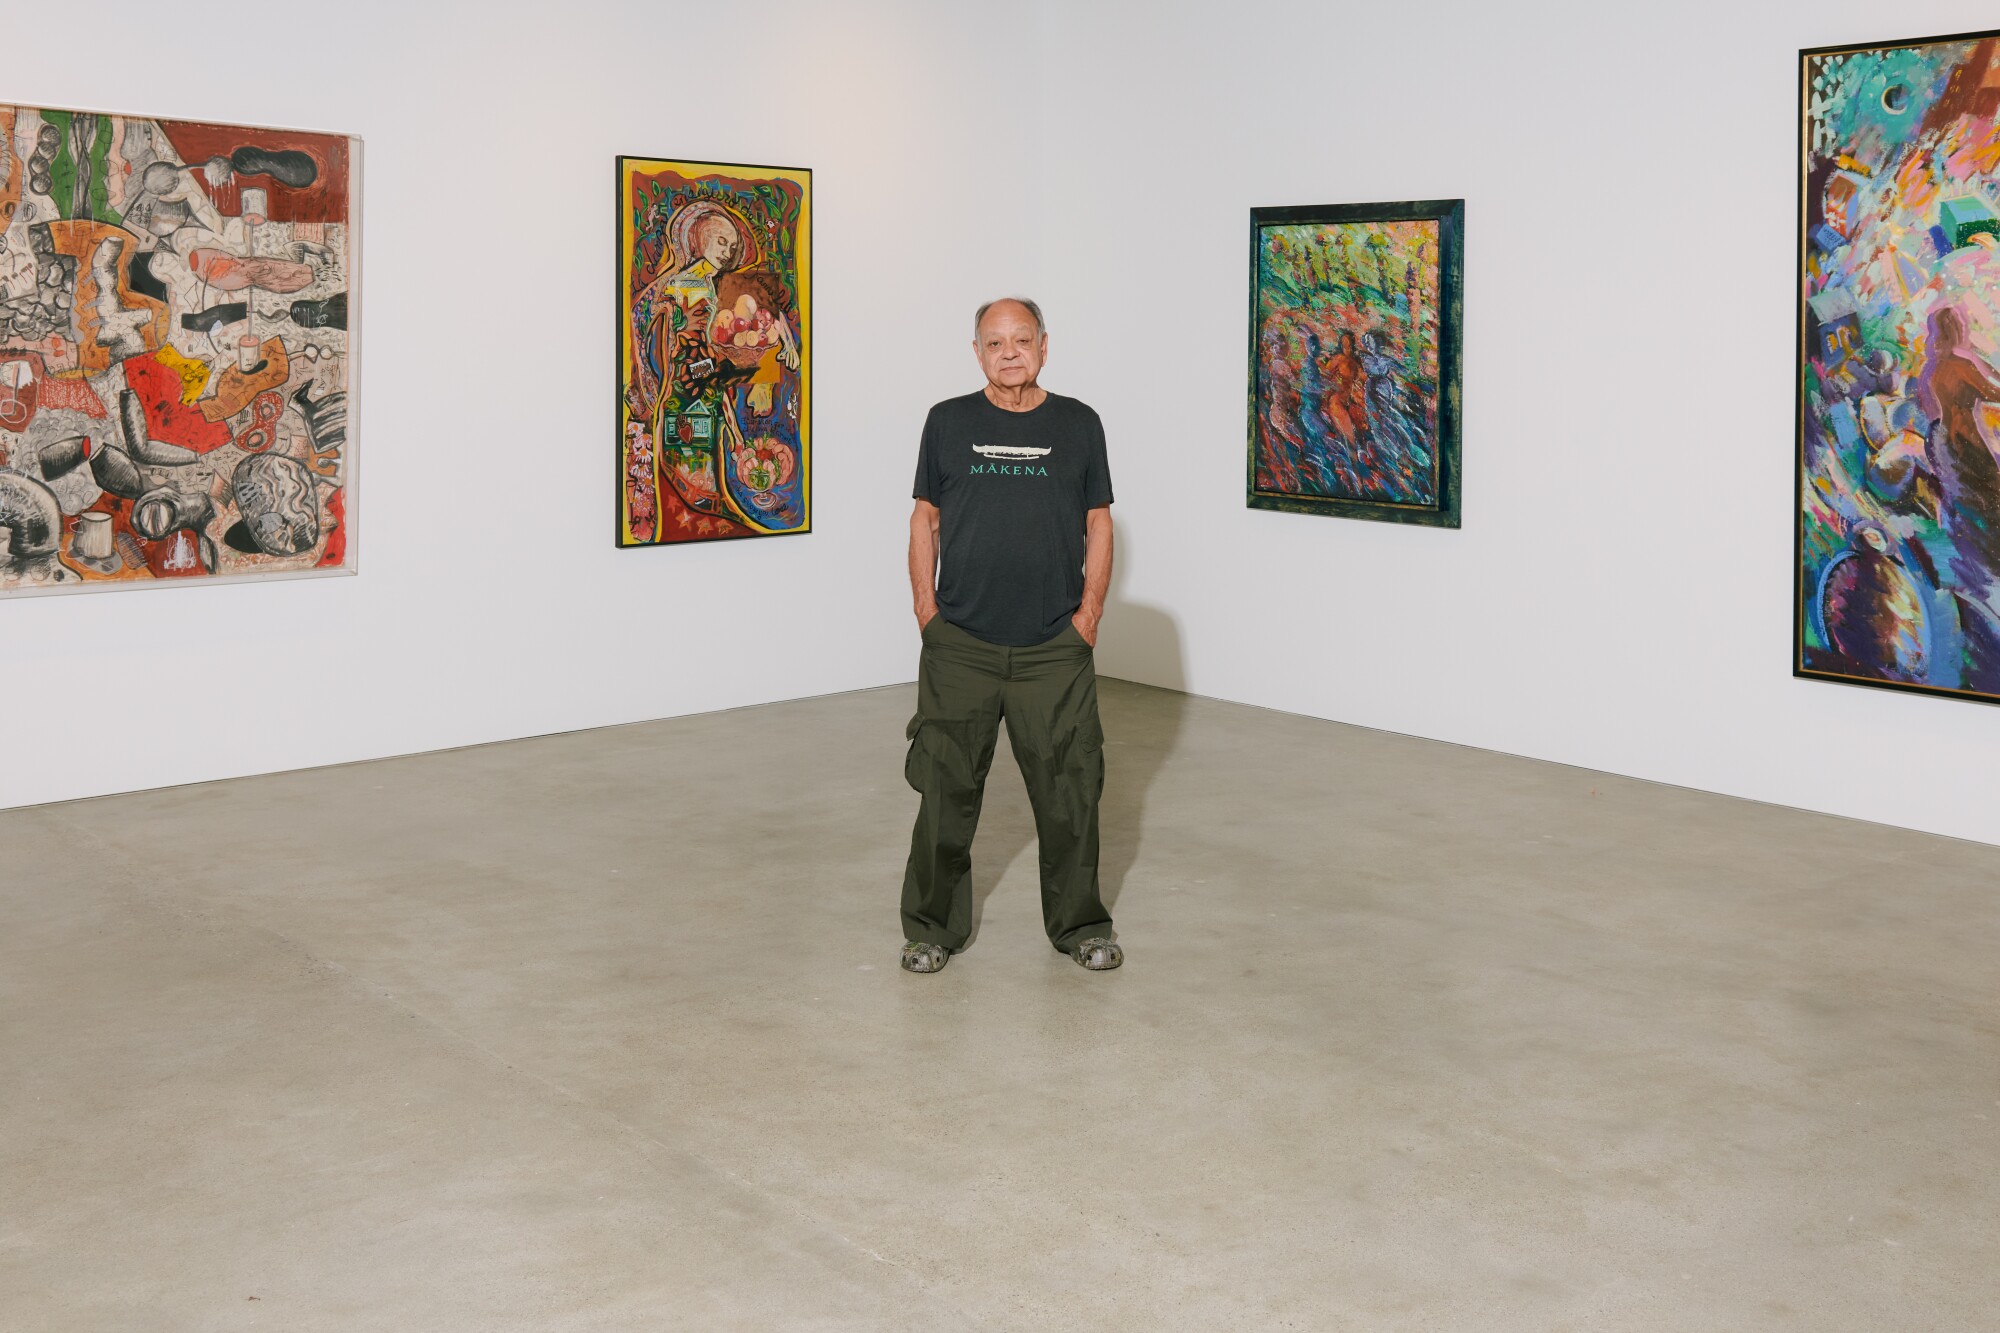 A man stands with his hands in his pockets in front of colorful paintings in a gallery with white walls.